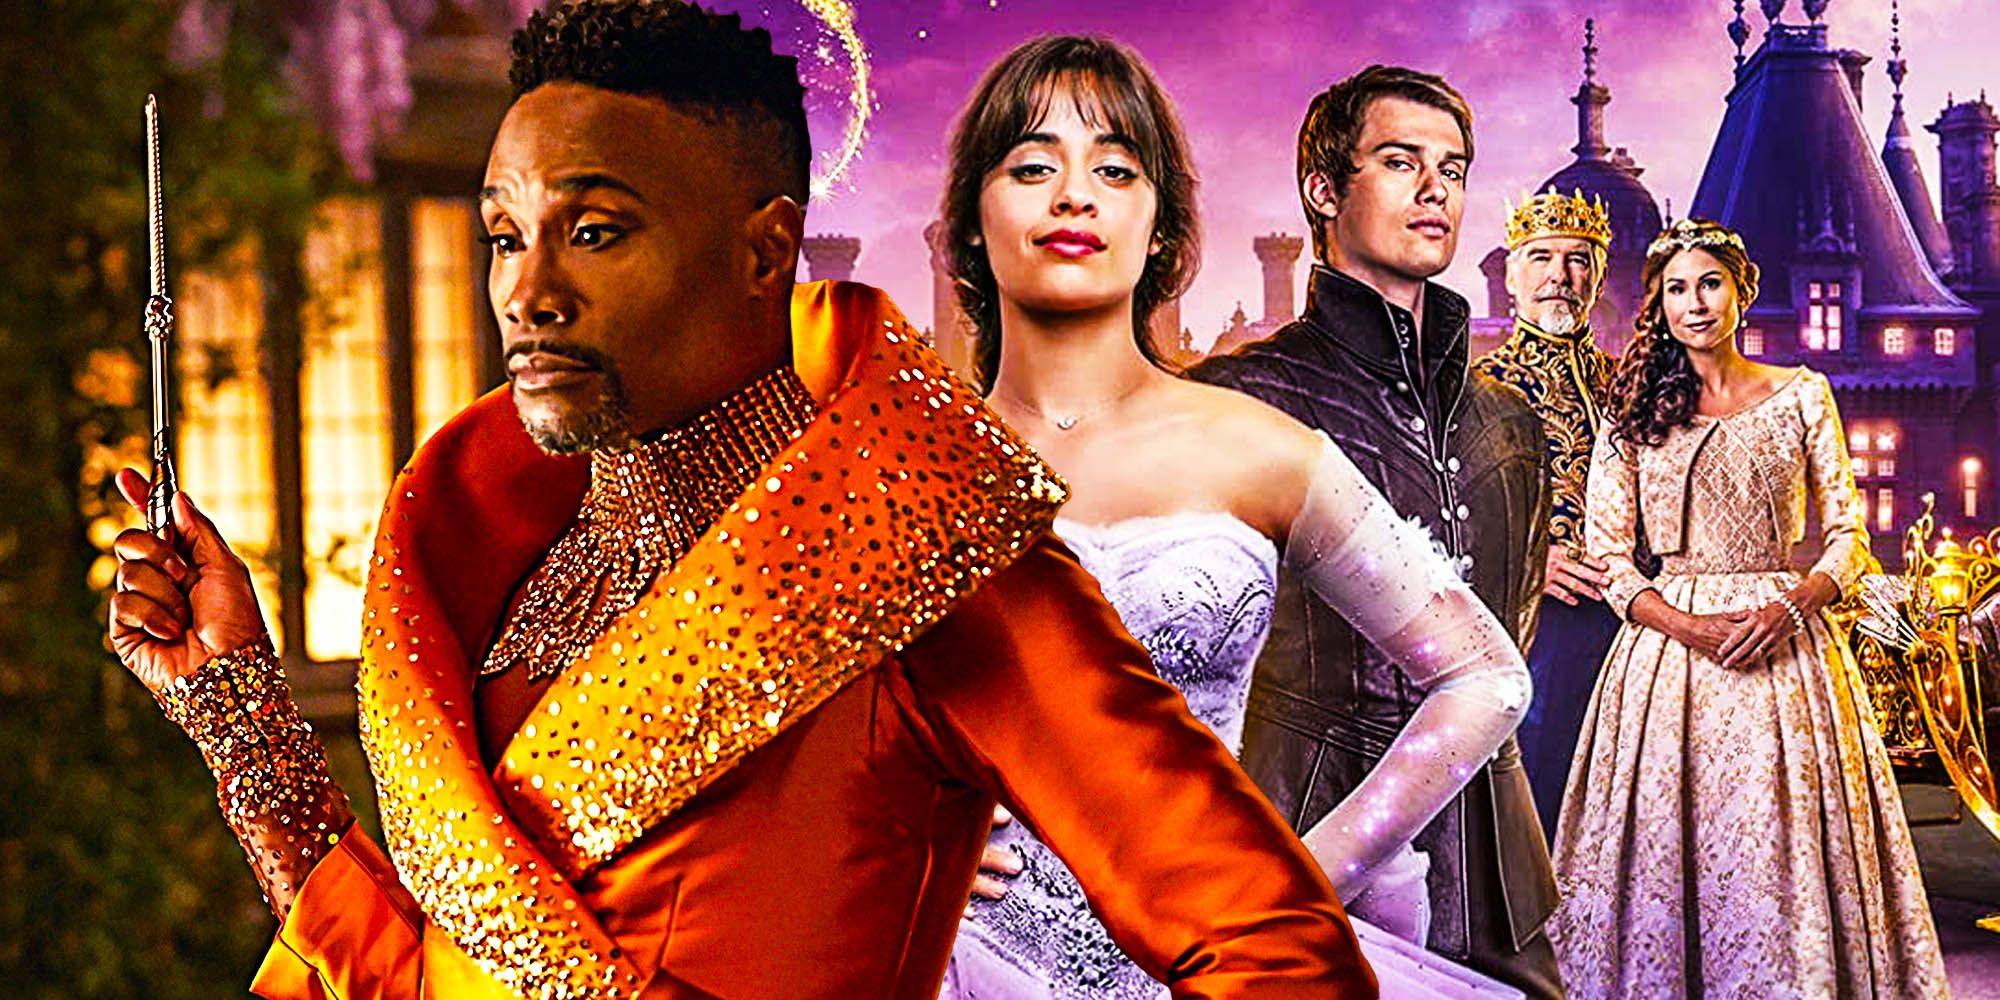 Cinderella 2021 Cast & Character Guide: Where You Know The Actors From